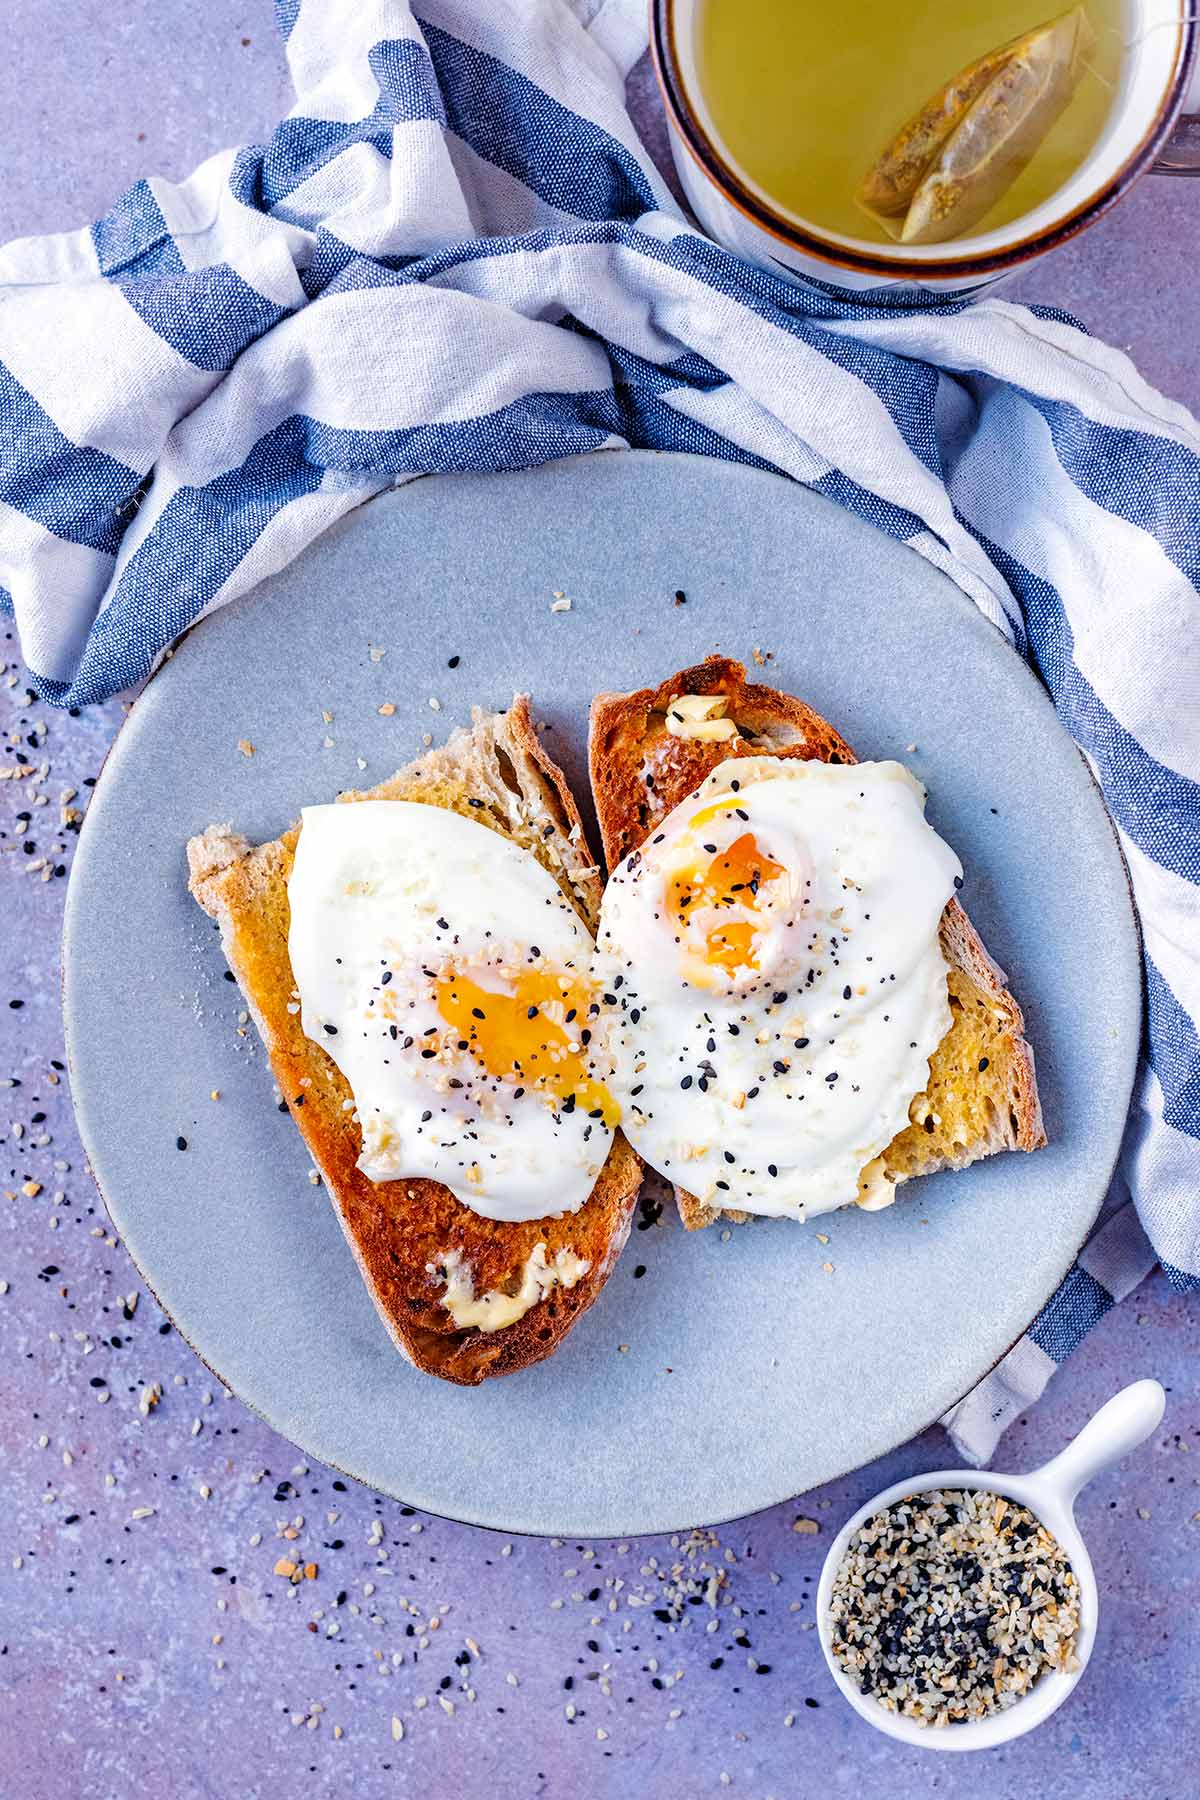 Two fried eggs on toast with broken yolks.